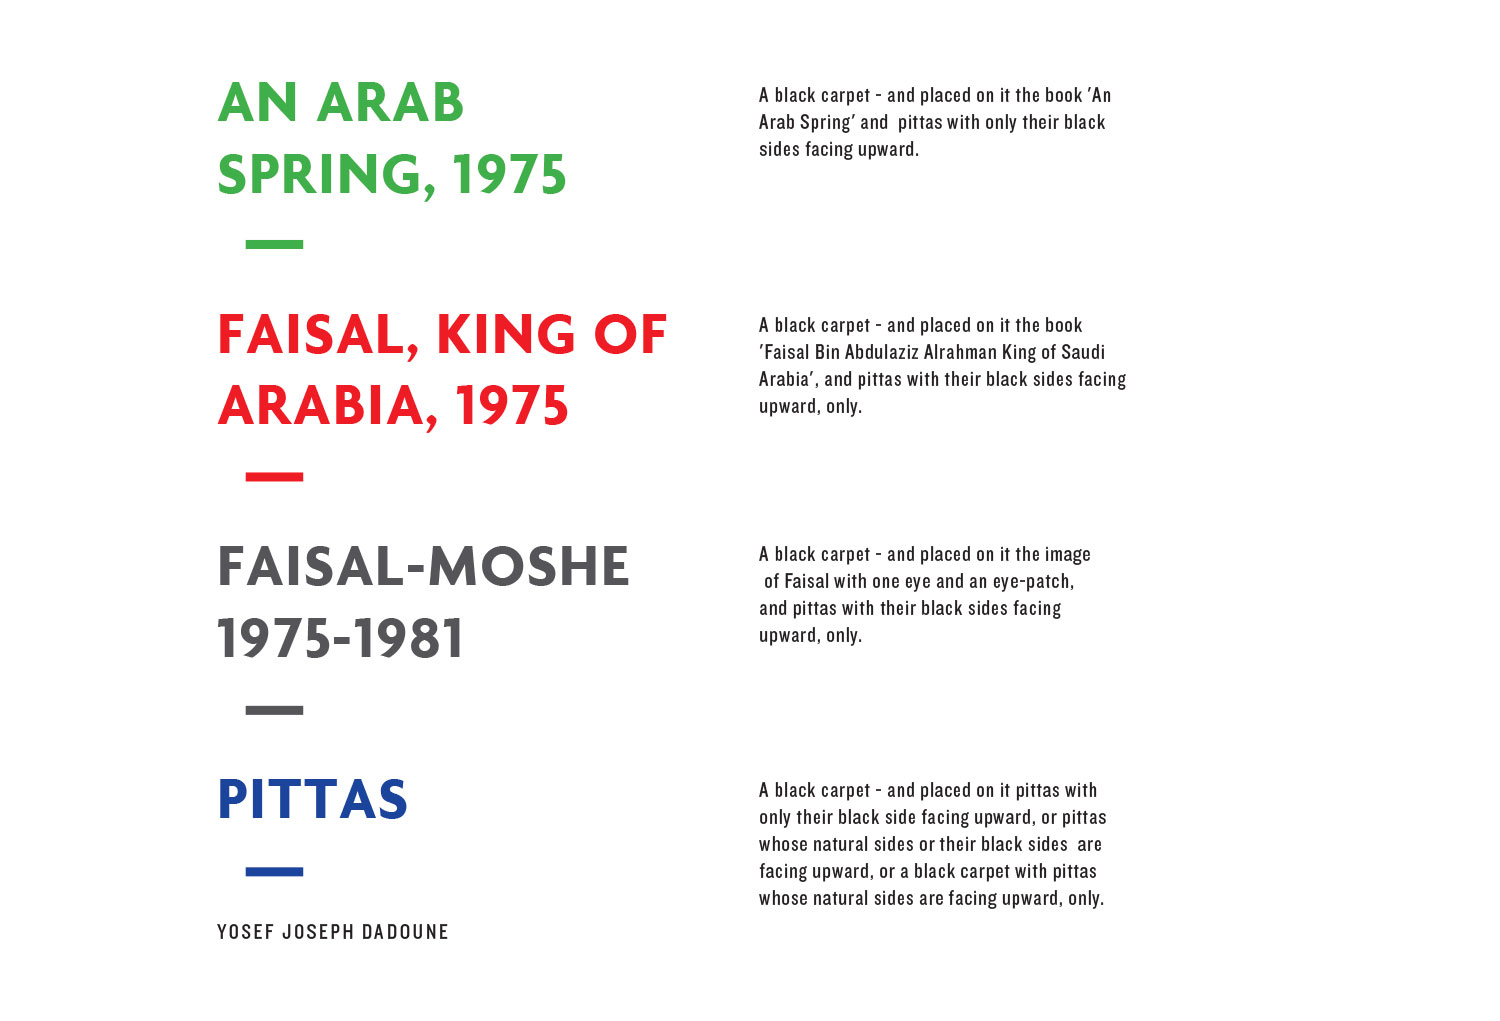   AN ARAB SPRING, 1975    FAISAL, KING OF ARABIA, 1975 FAISAL-MOSHE 1975-1981 PITTAS      Download PDF    Design and production: Koby Levy &amp; Zohar Koren  Pages: 87  Year: 2014 